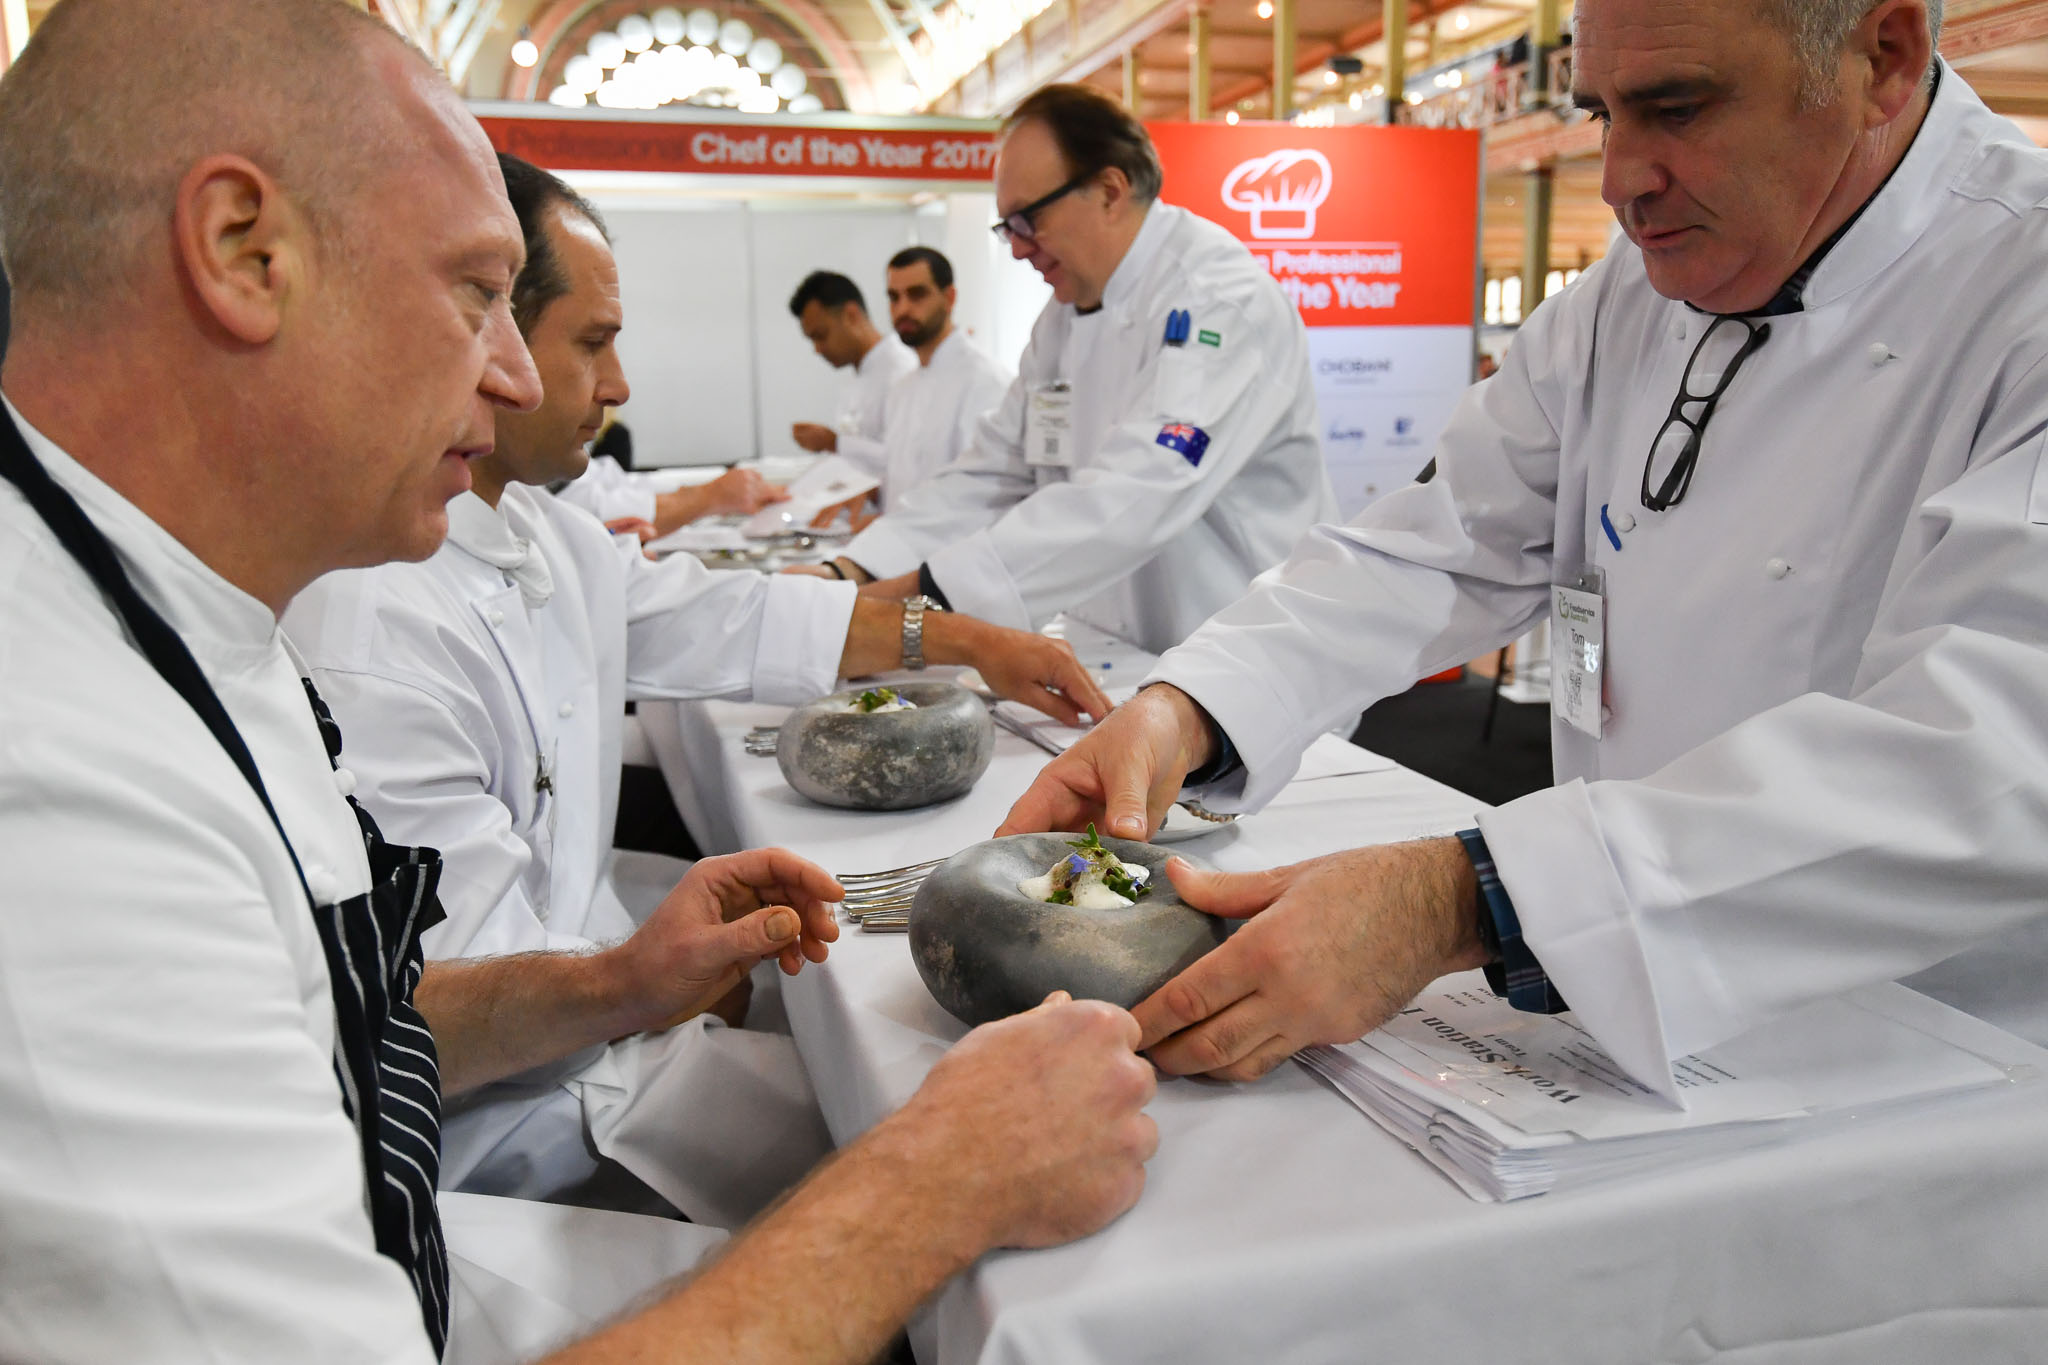 Melbourne, 30 May 2017 - Tom Milligan of the Bocuse d'Or Academy Australia delivers the fish dish for Donovan Cooke from The Atlantic Restaurant a judge of the fish plate to taste at the Australian selection trials of the Bocuse d'Or culinary competition held during the Food Service Australia show at the Royal Exhibition Building in Melbourne, Australia. Photo Sydney Low